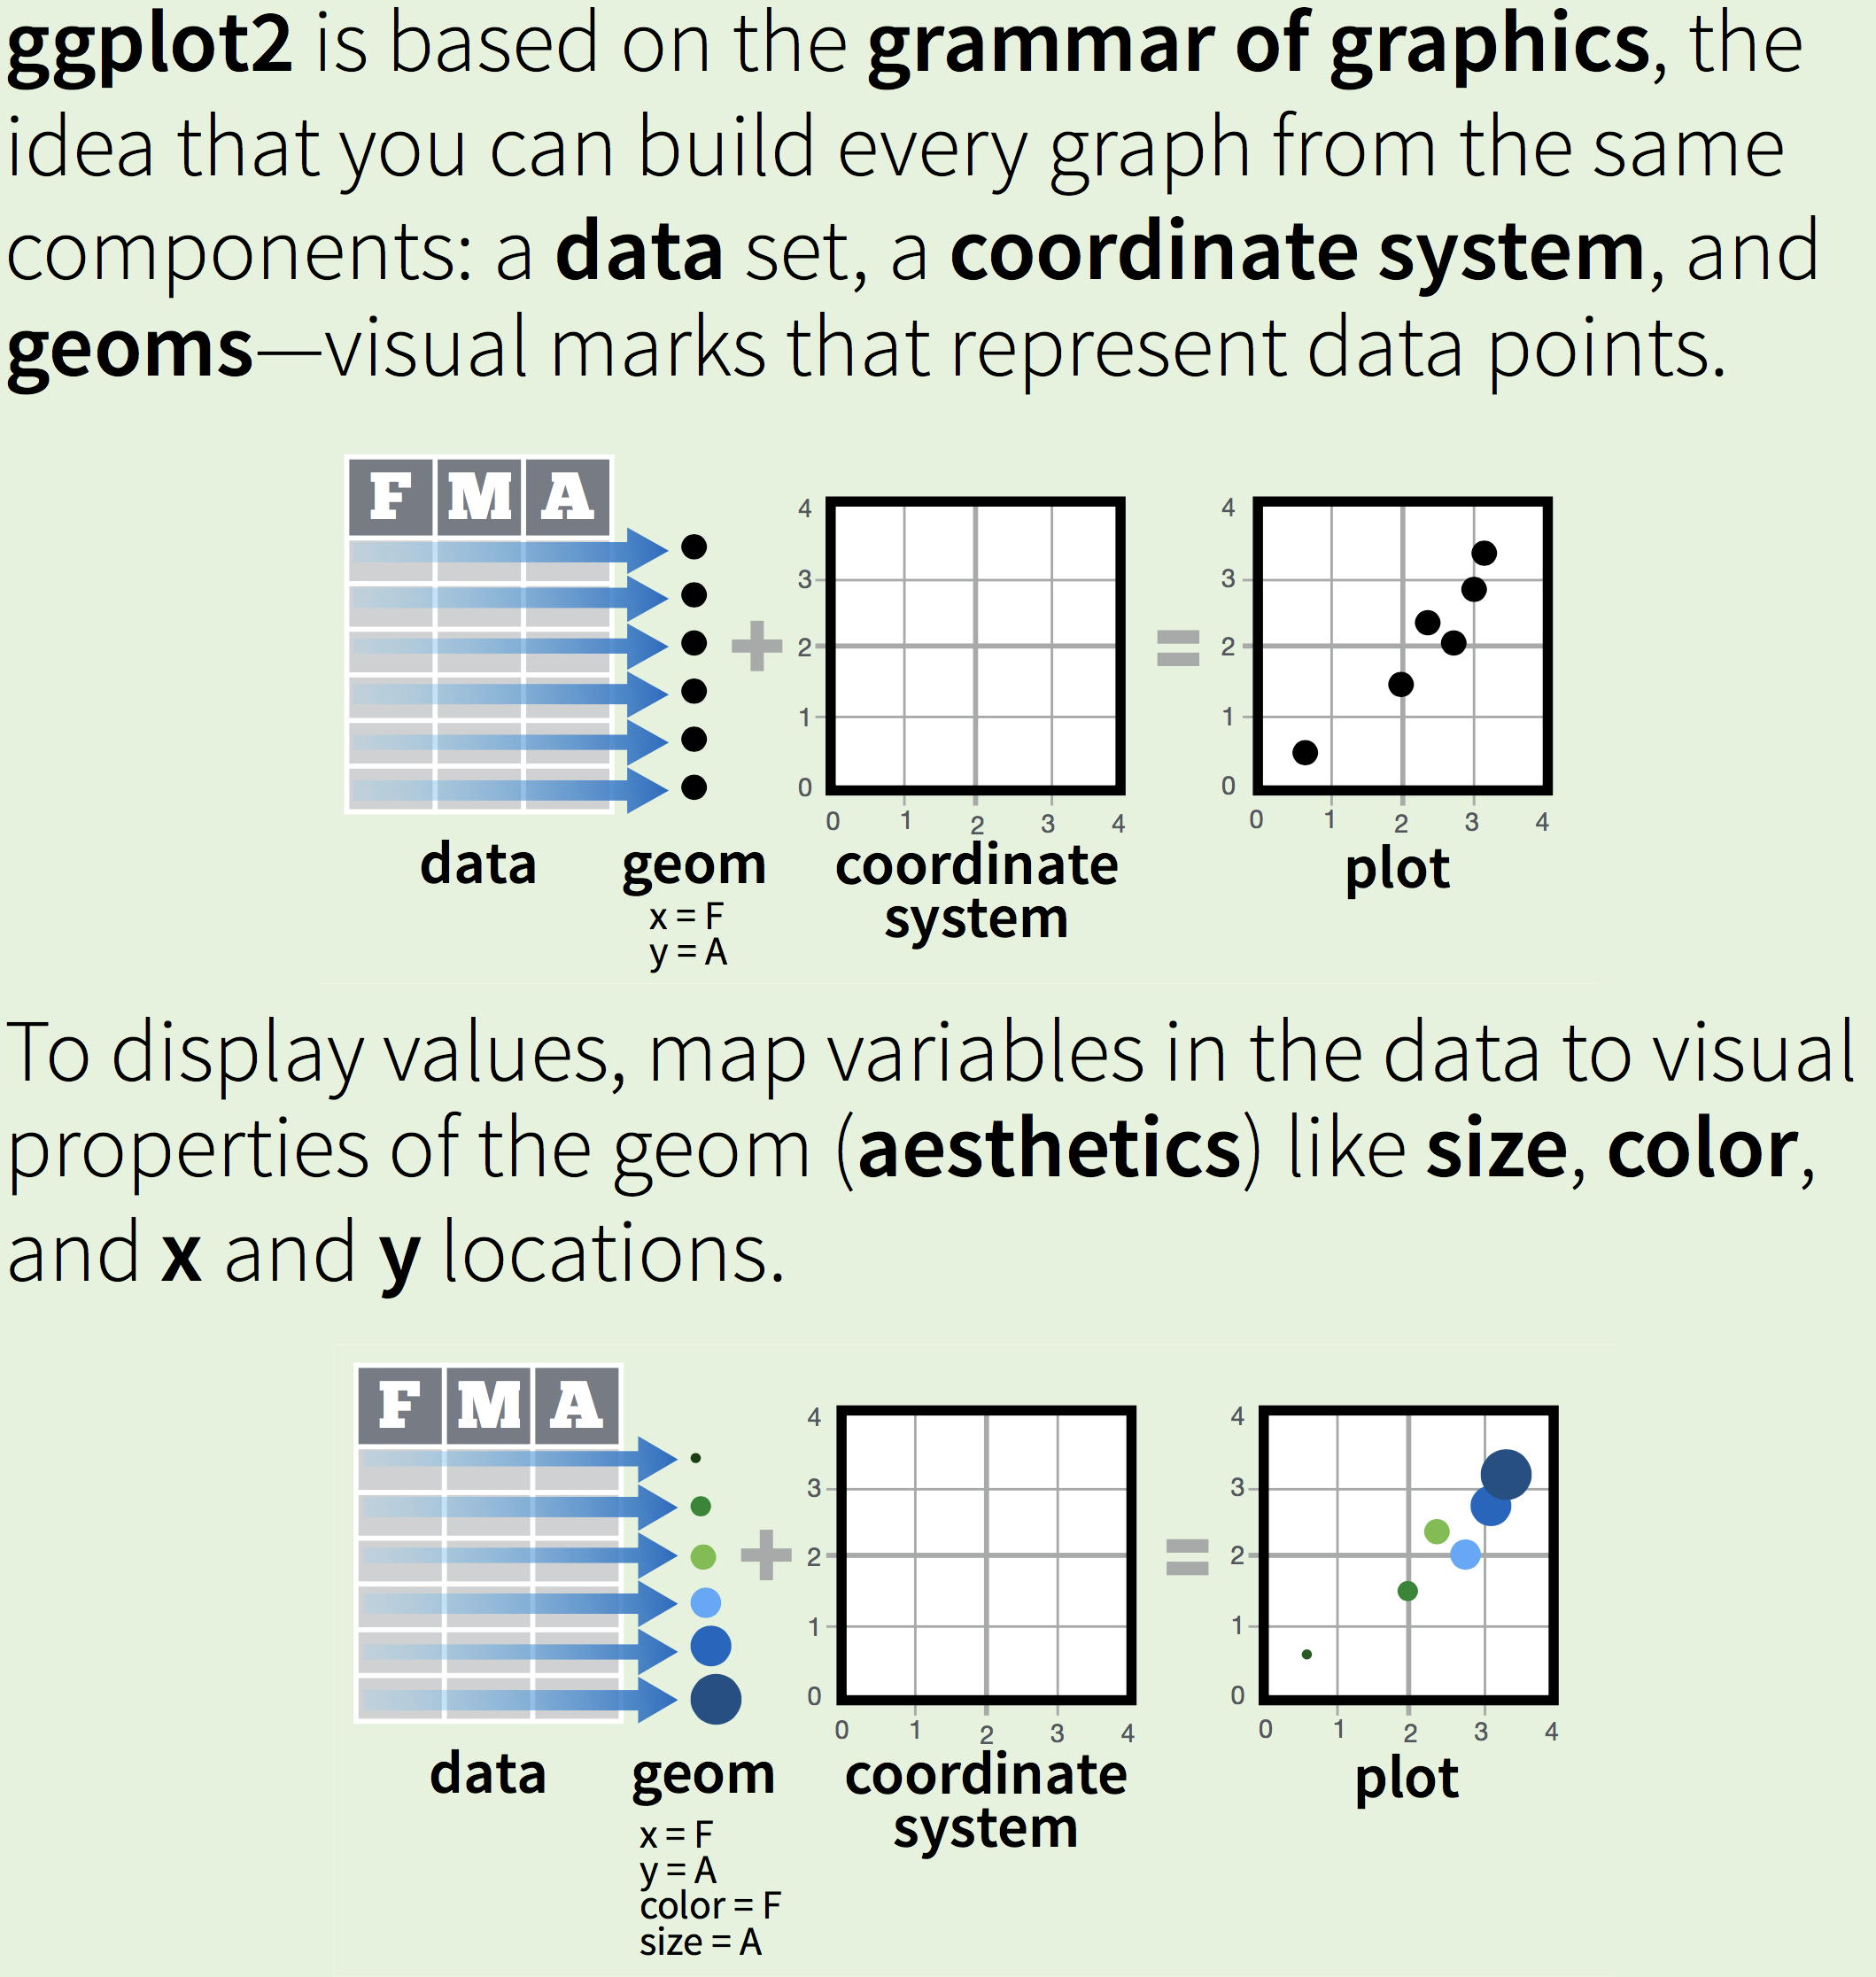 visualization of the grammer of graphics